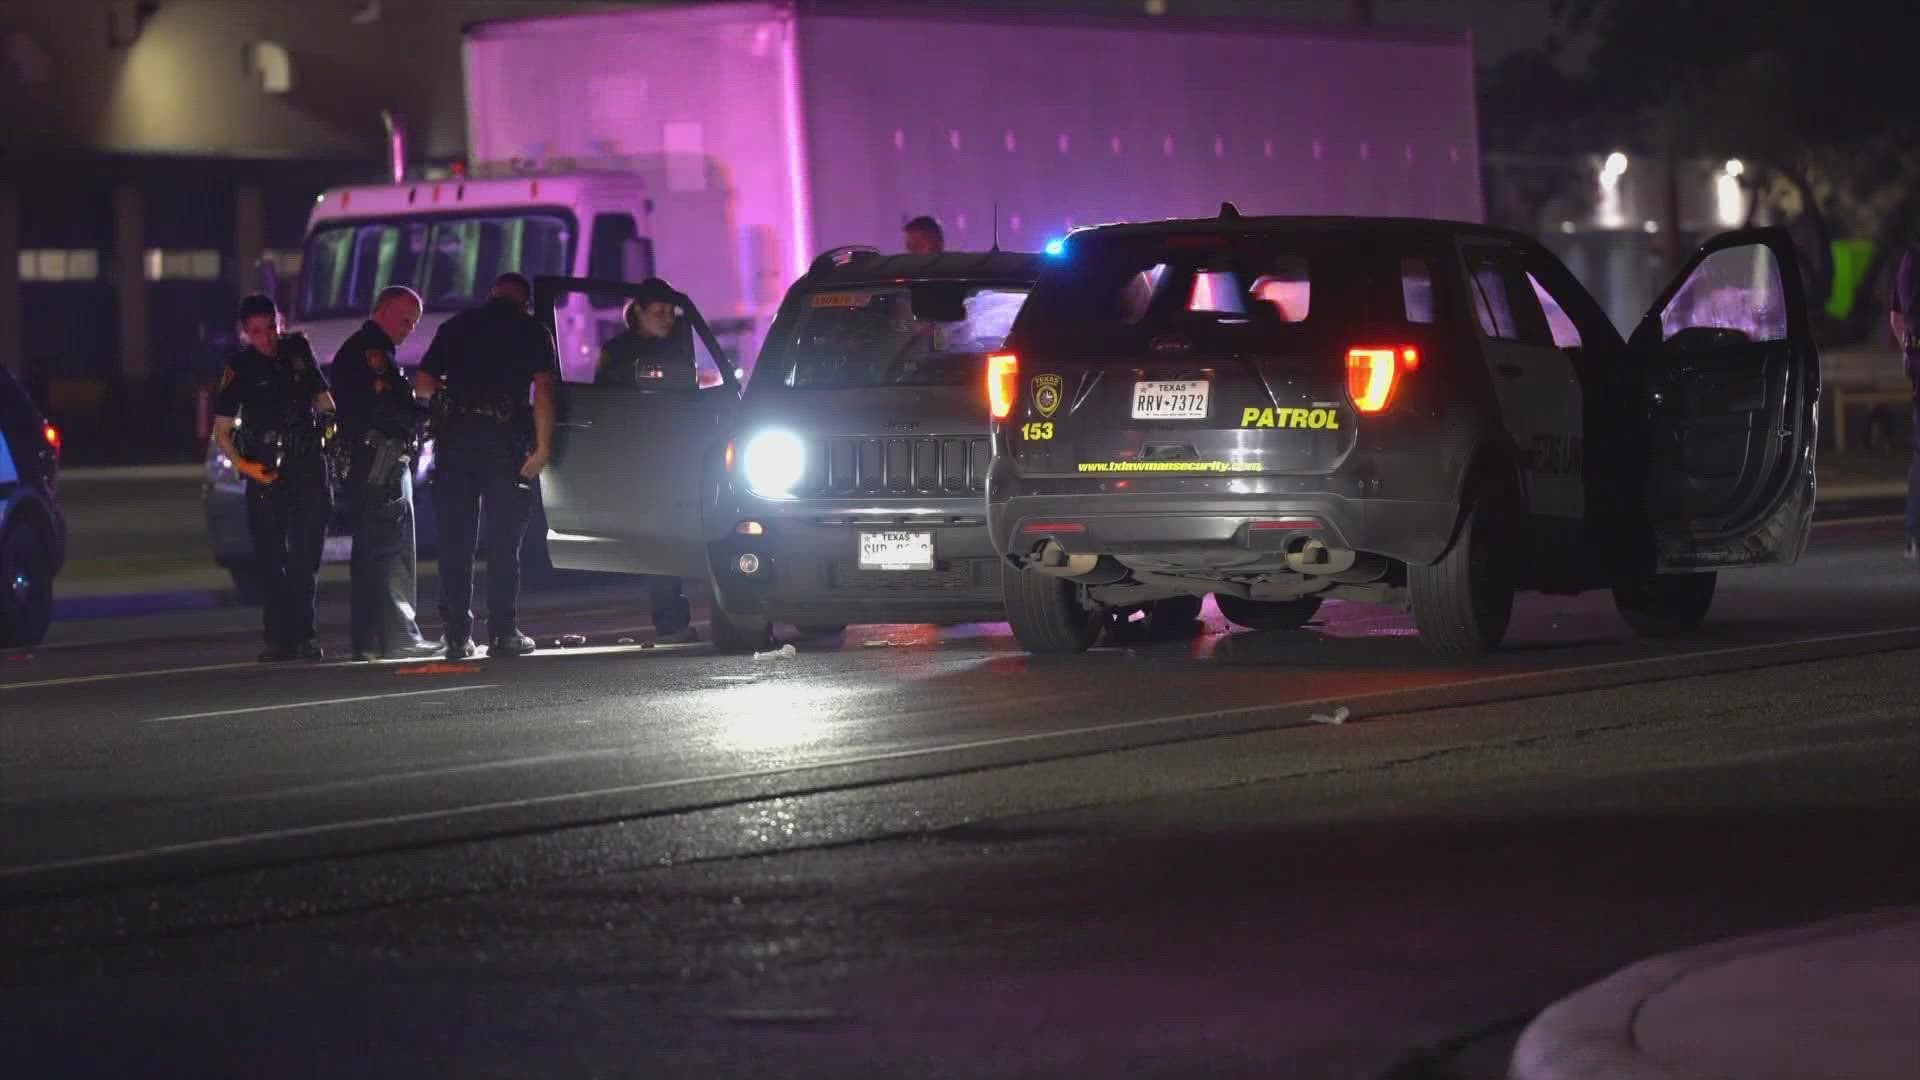 The woman was shot in the head and ended up crashing into another car, police say.